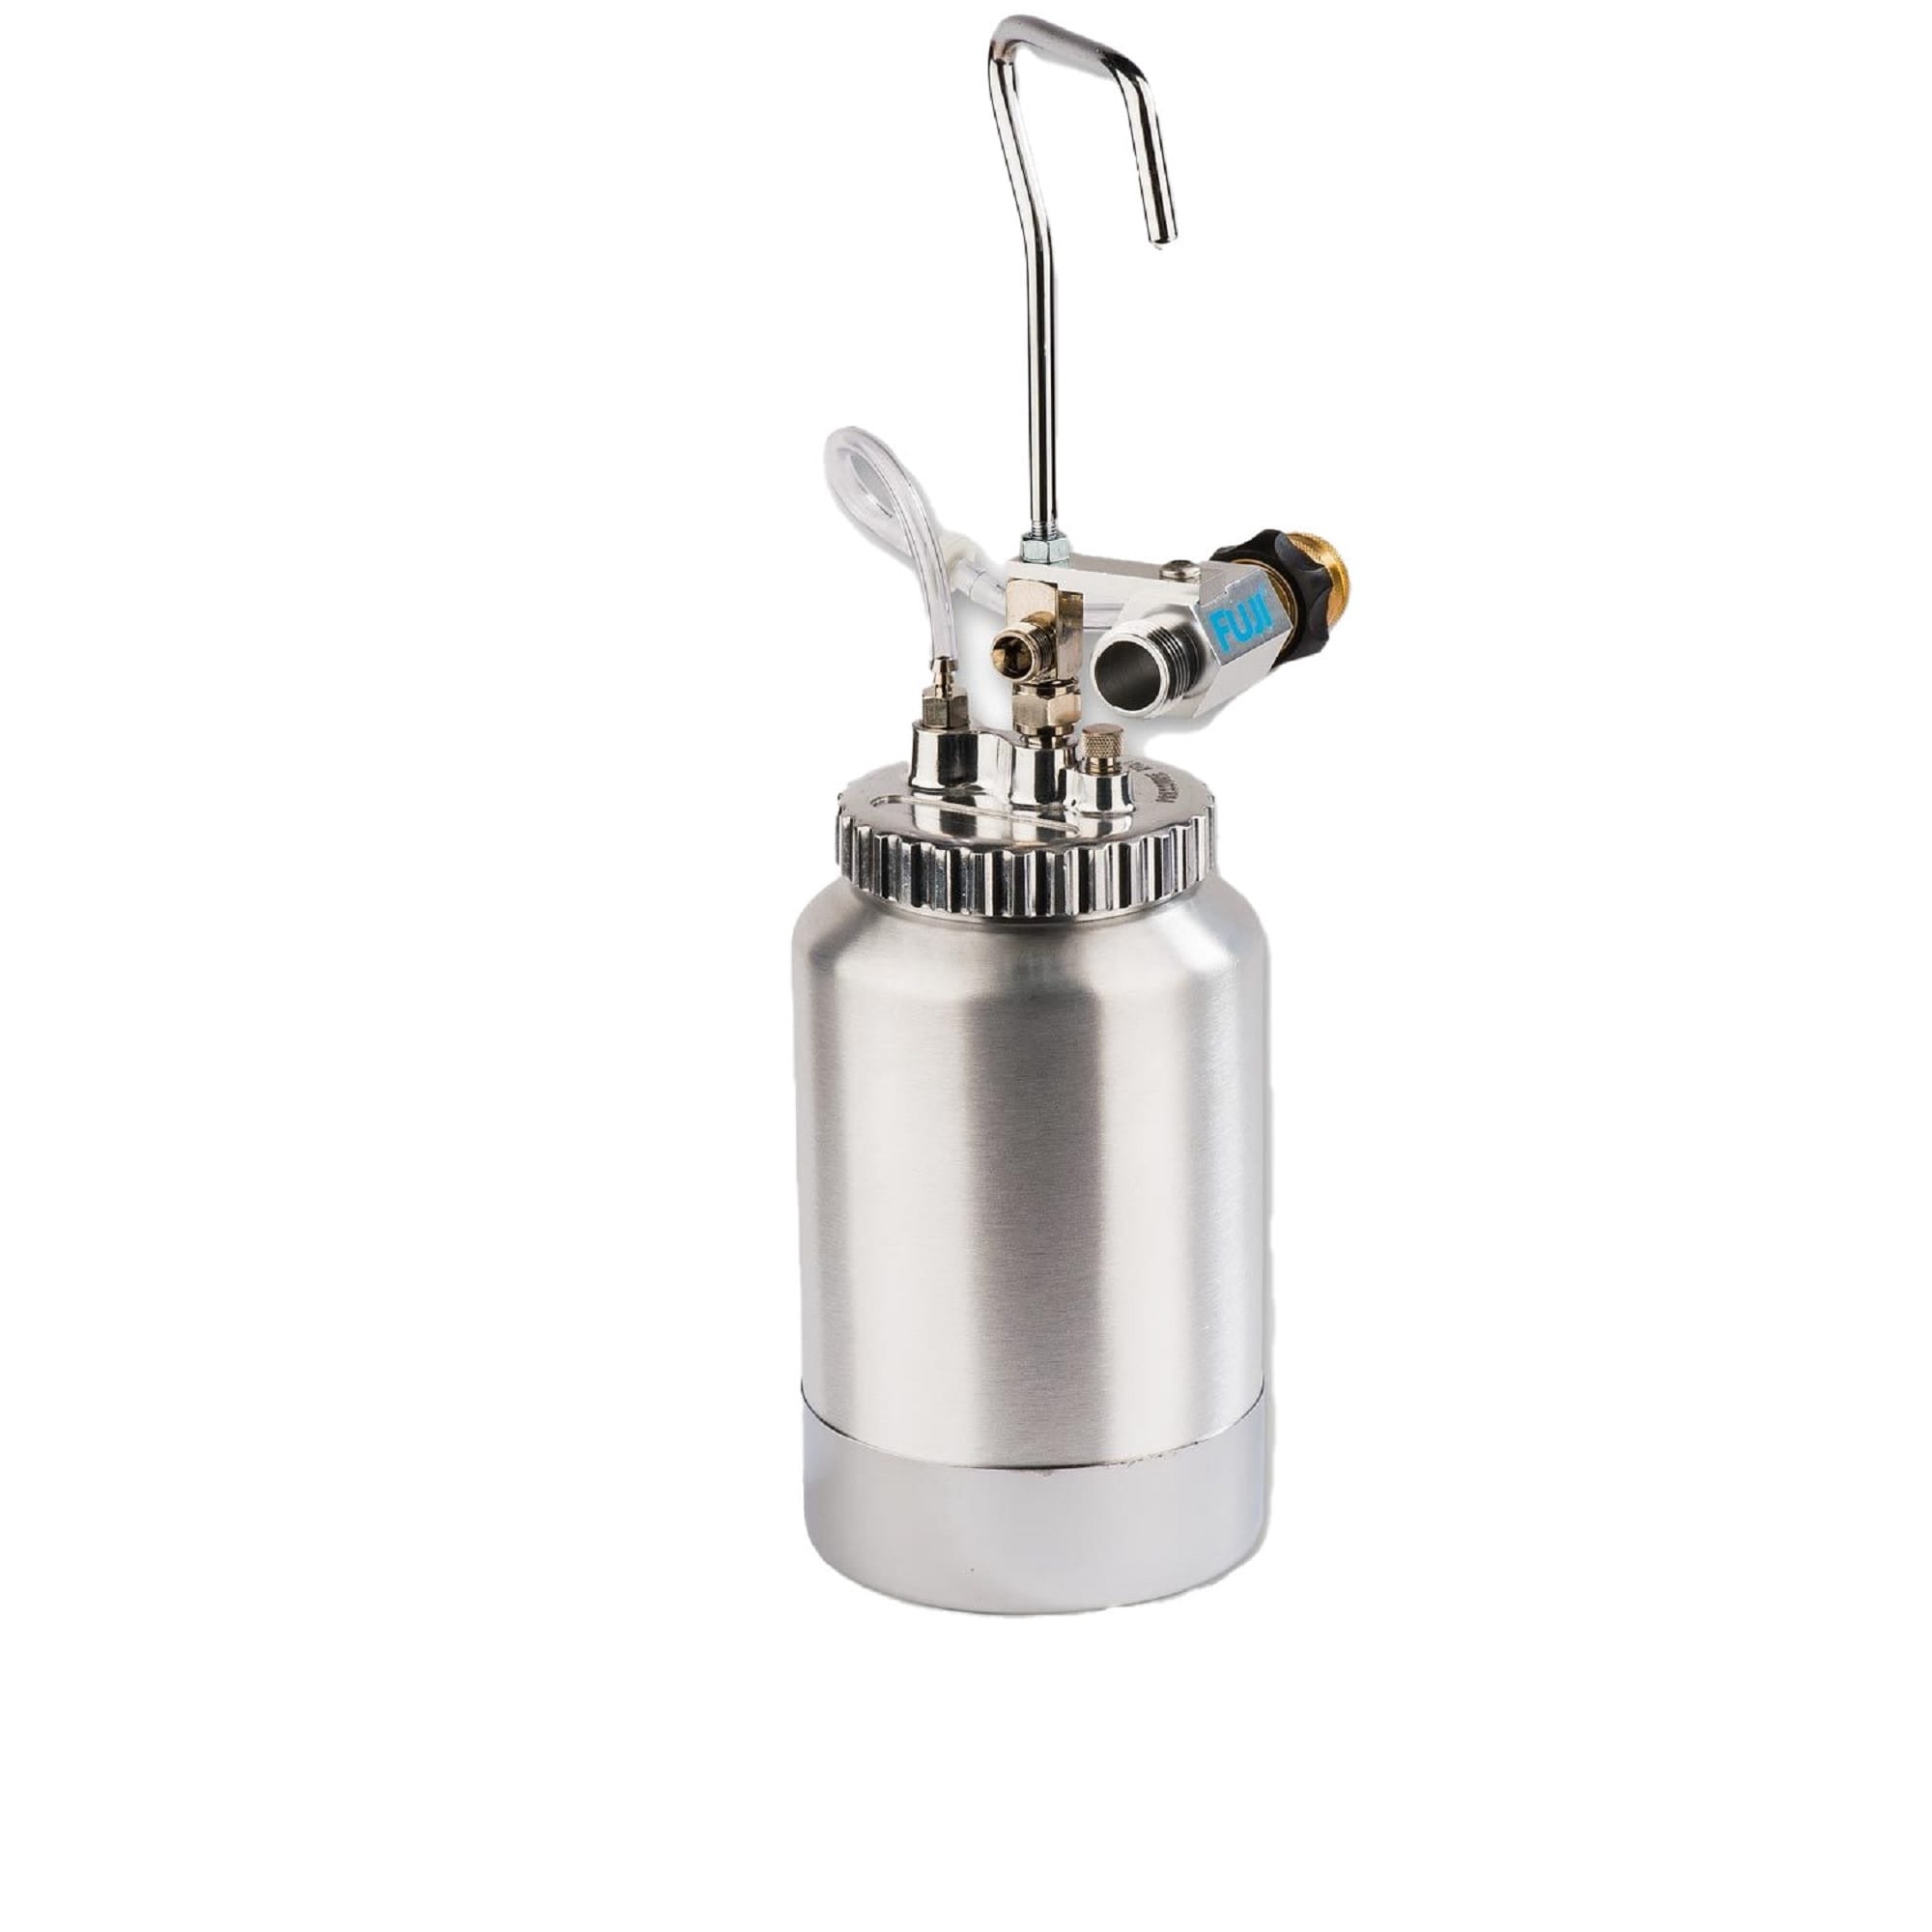 https://ak1.ostkcdn.com/images/products/is/images/direct/6e64053f8fe48475c494f270cfd17698f788fd8c/Fuji-Spray-2-Quart-Pressure-Pot-Assembly-Kit-w-6-Ft-Flexible-Whip-Hose.jpg